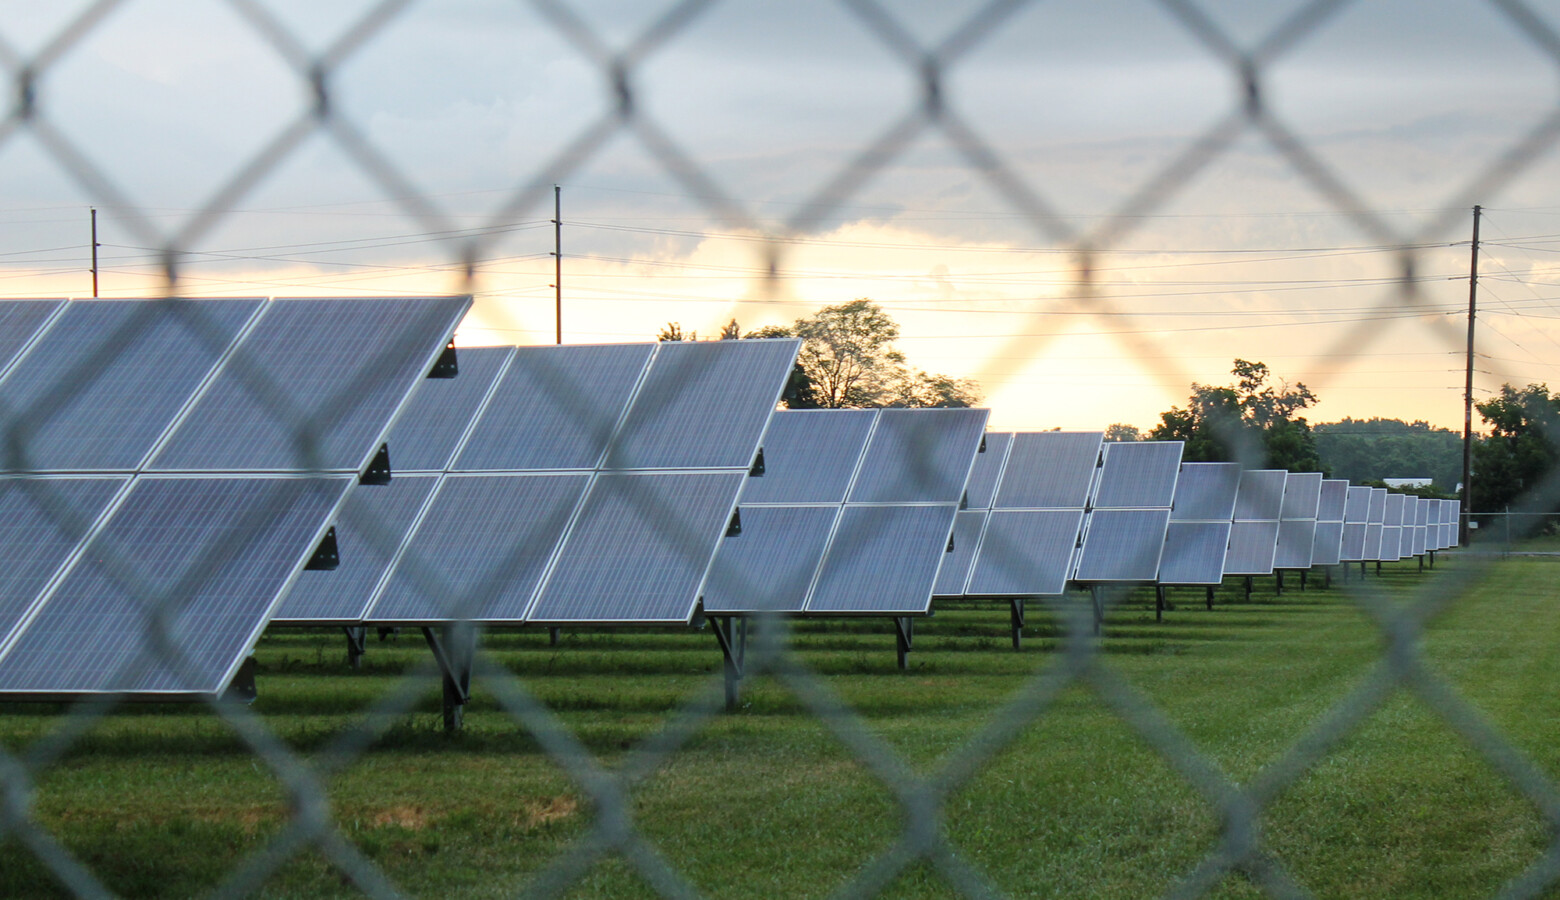 Indiana is expected to see the third highest increase in megawatts of large-scale solar in the country — with nearly four gigawatts, or 4,000 megawatts, proposed. (Lauren Chapman/IPB News)